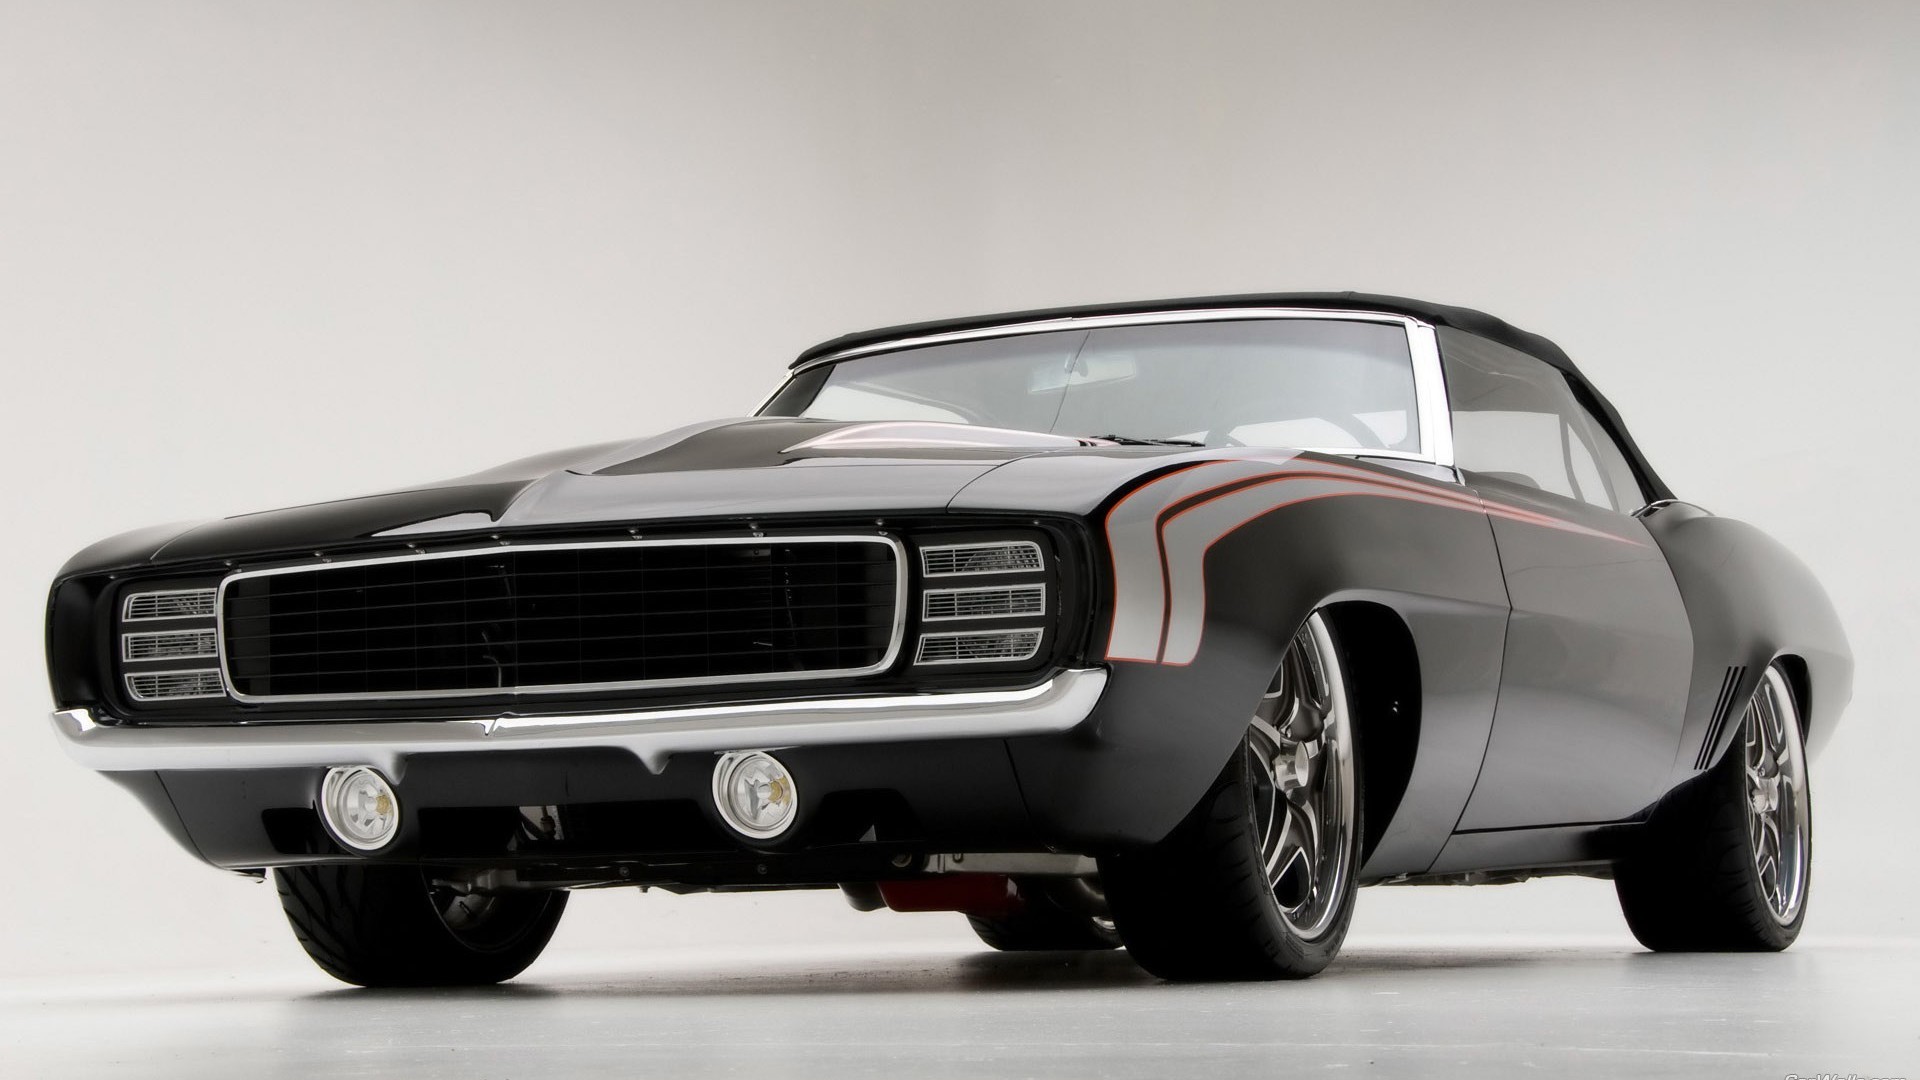 Chevy Muscle Car Wallpaper HD In Cars Imageci